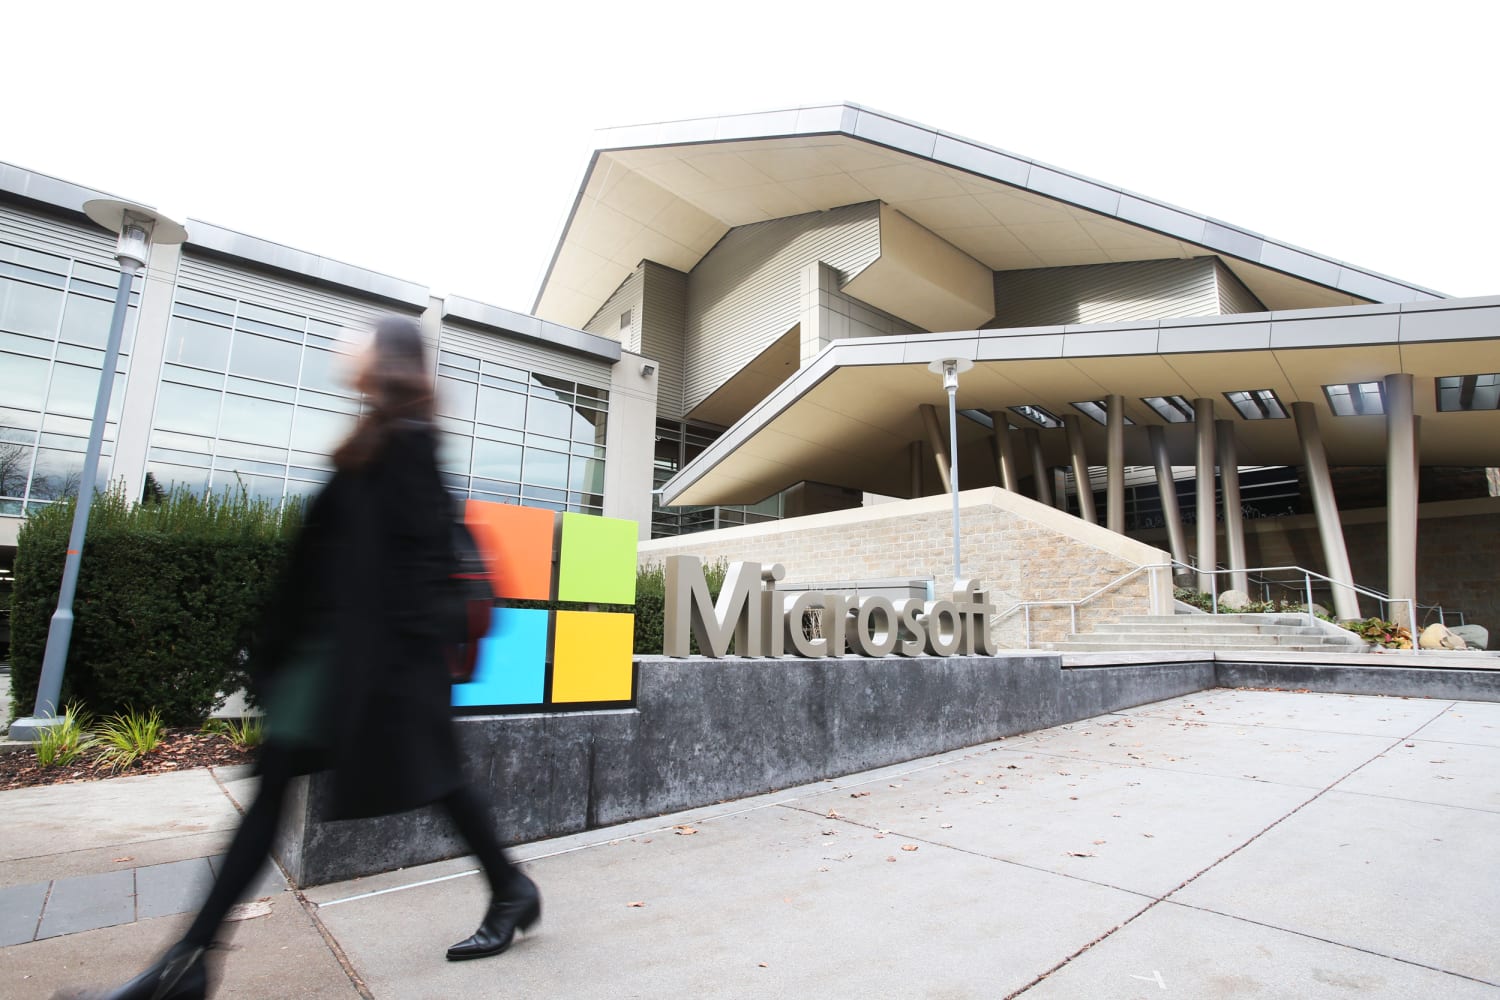 Microsoft to lay off 10,000 workers, citing concern about a possible recession